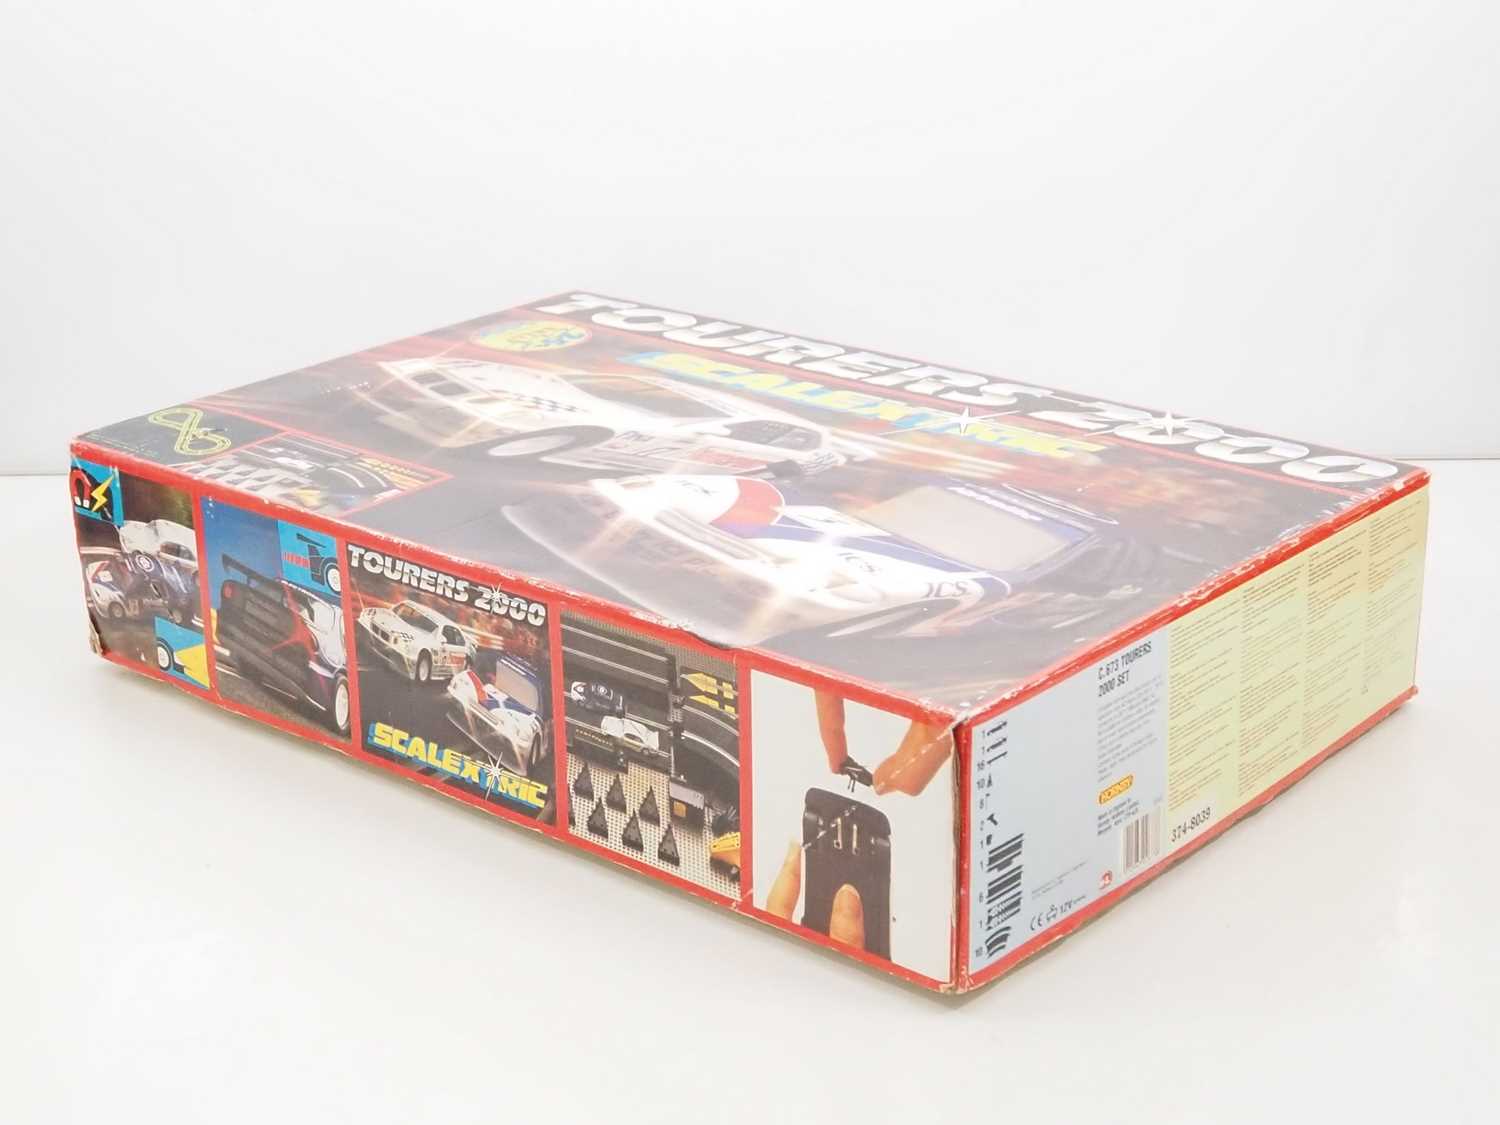 A SCALEXTRIC 'Tourers 2000' slot racing set, appears complete - VG in G box - Image 3 of 3